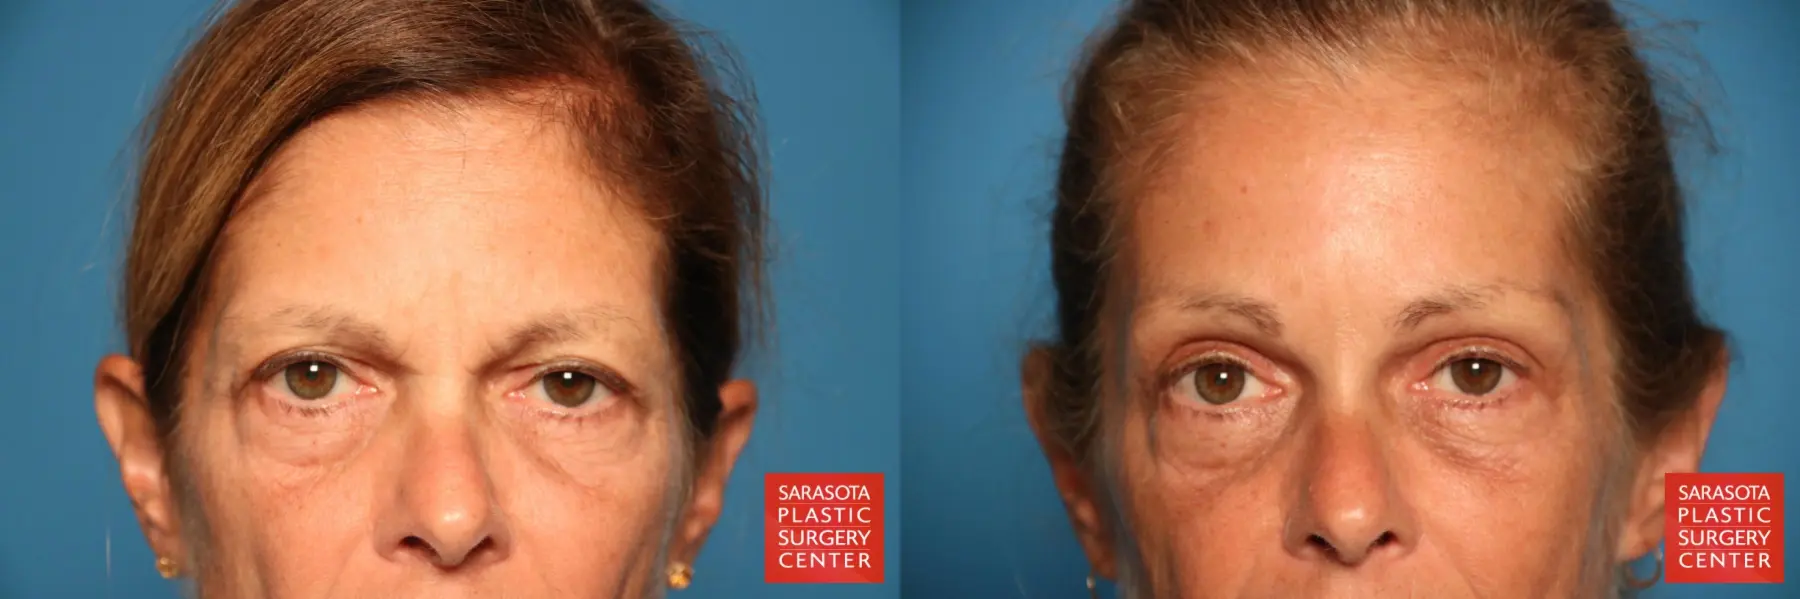 Brow Lift: Patient 2 - Before and After 1